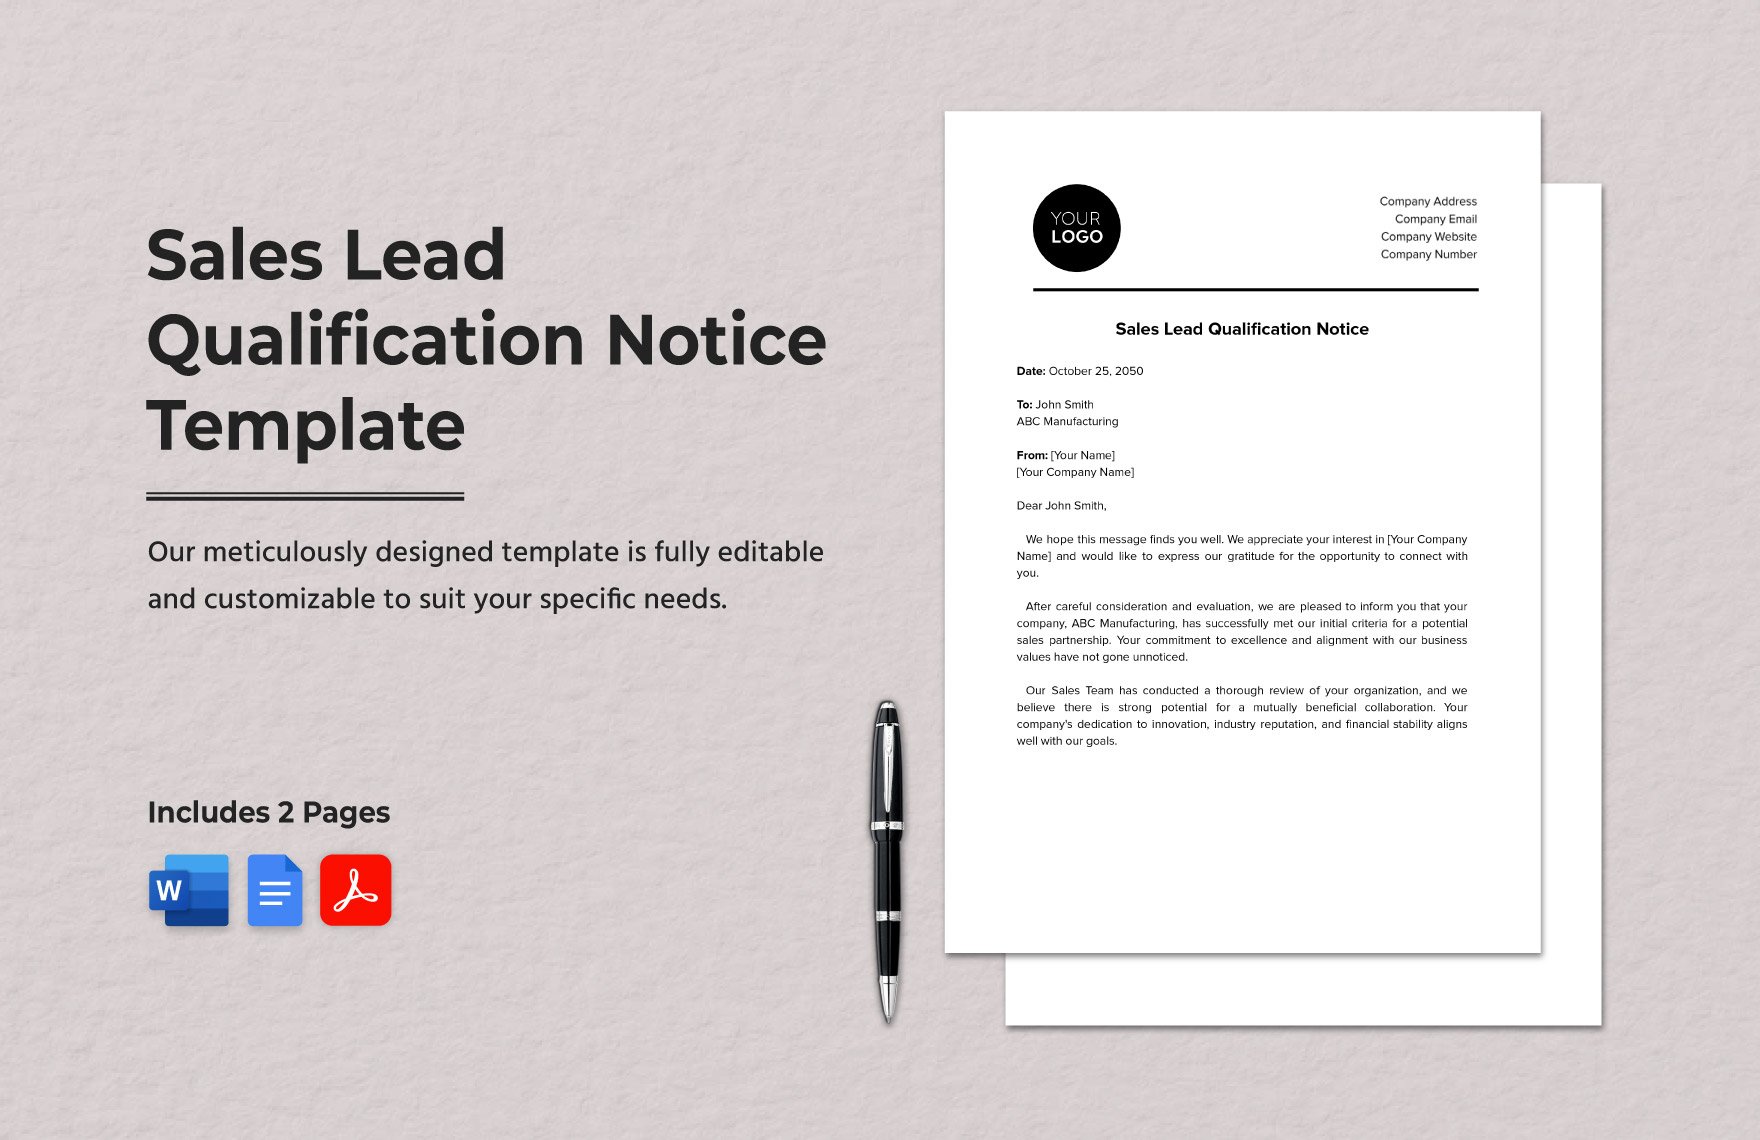 Sales Lead Qualification Notice Template in Word, Google Docs, PDF